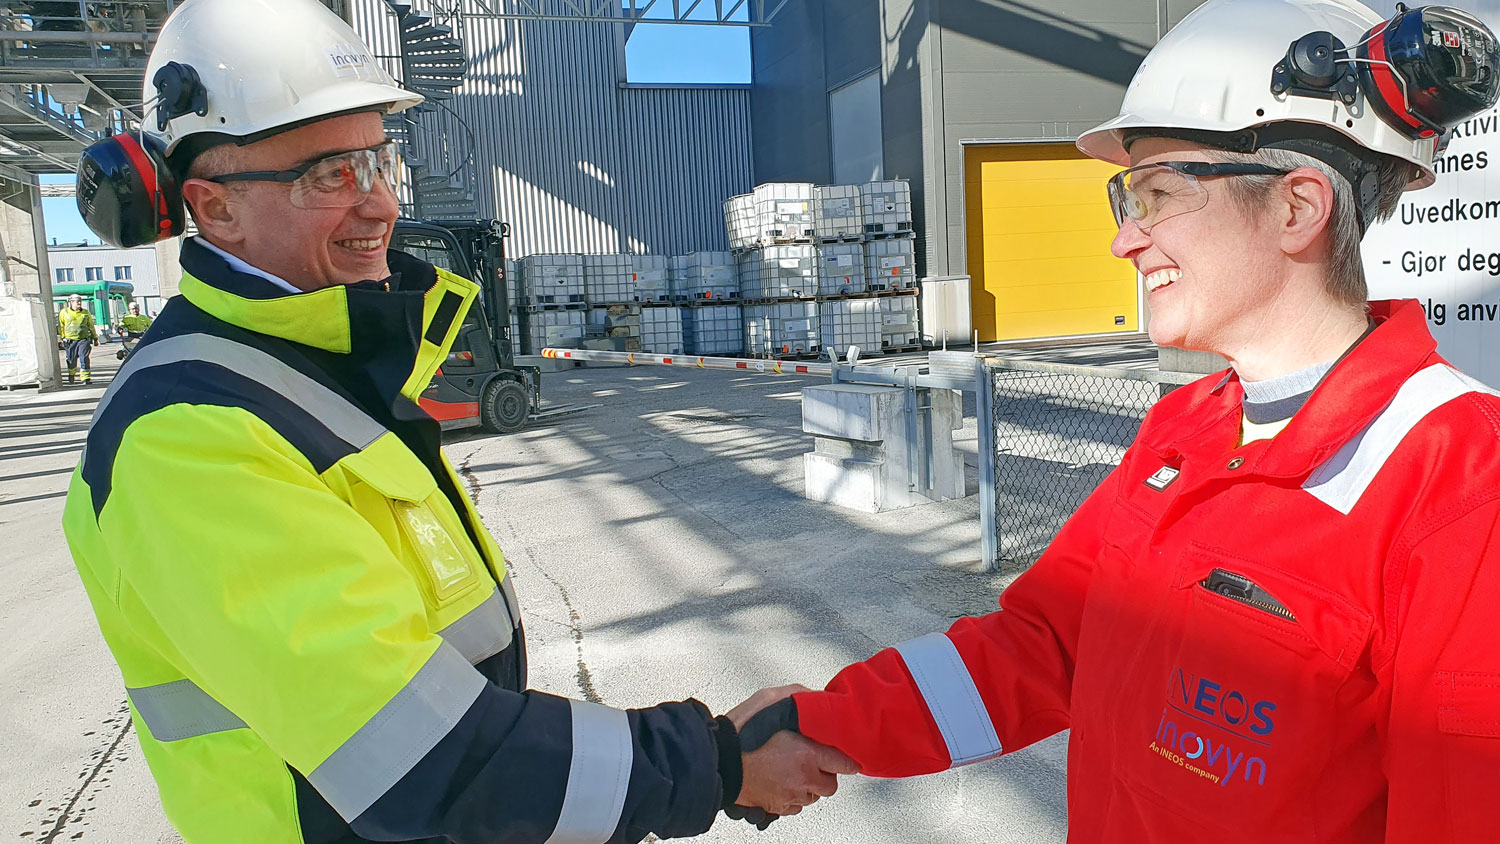 two persons, shaking hands, white helmets, process industry, outdoors